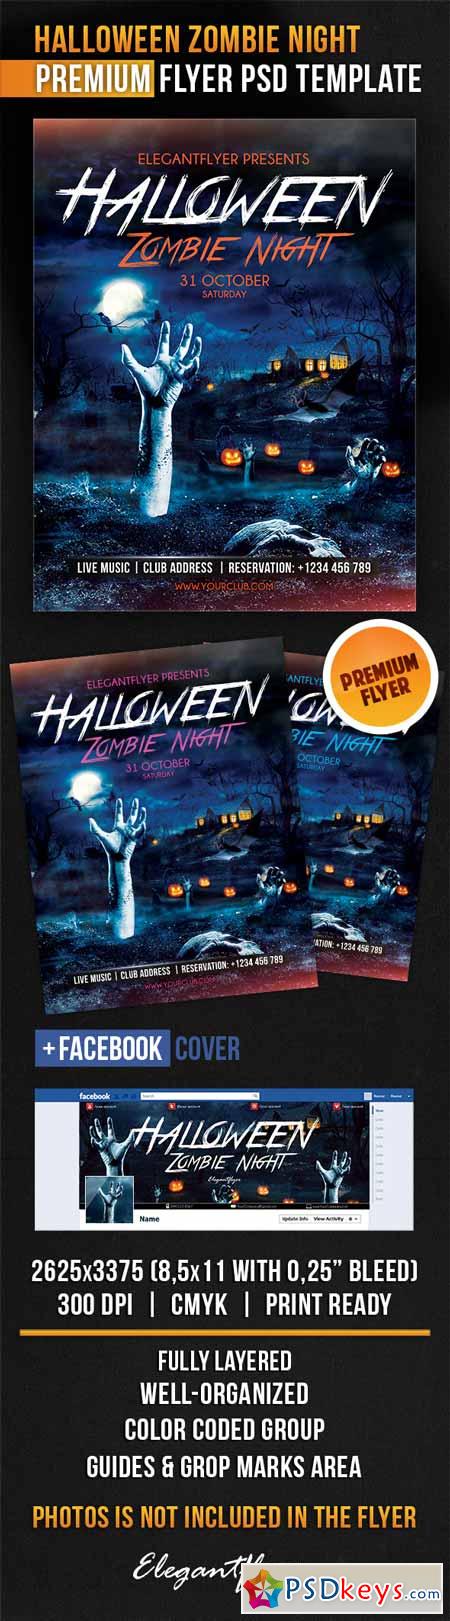 Halloween Zombie Night  Flyer PSD Template + Facebook Cover